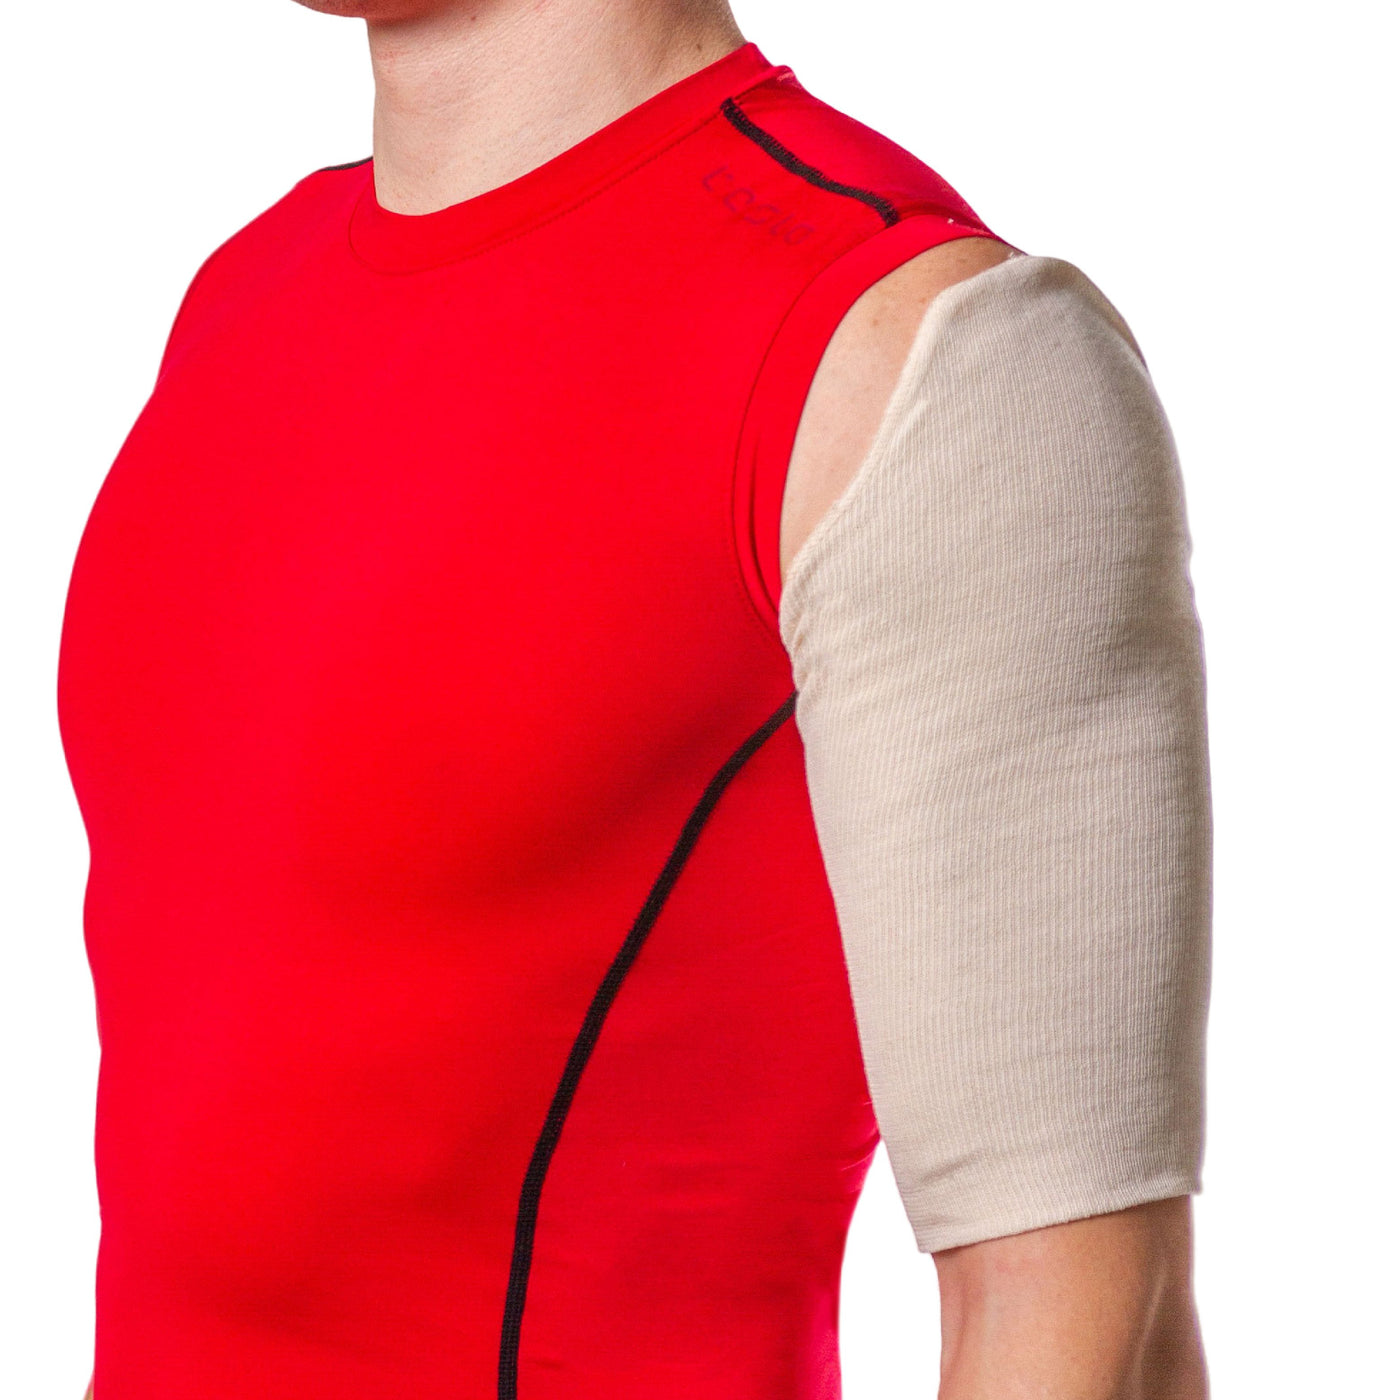 Stockinette under sleeve for Sarmiento brace for humeral shaft fracture is thin and lightweight and is hand washable